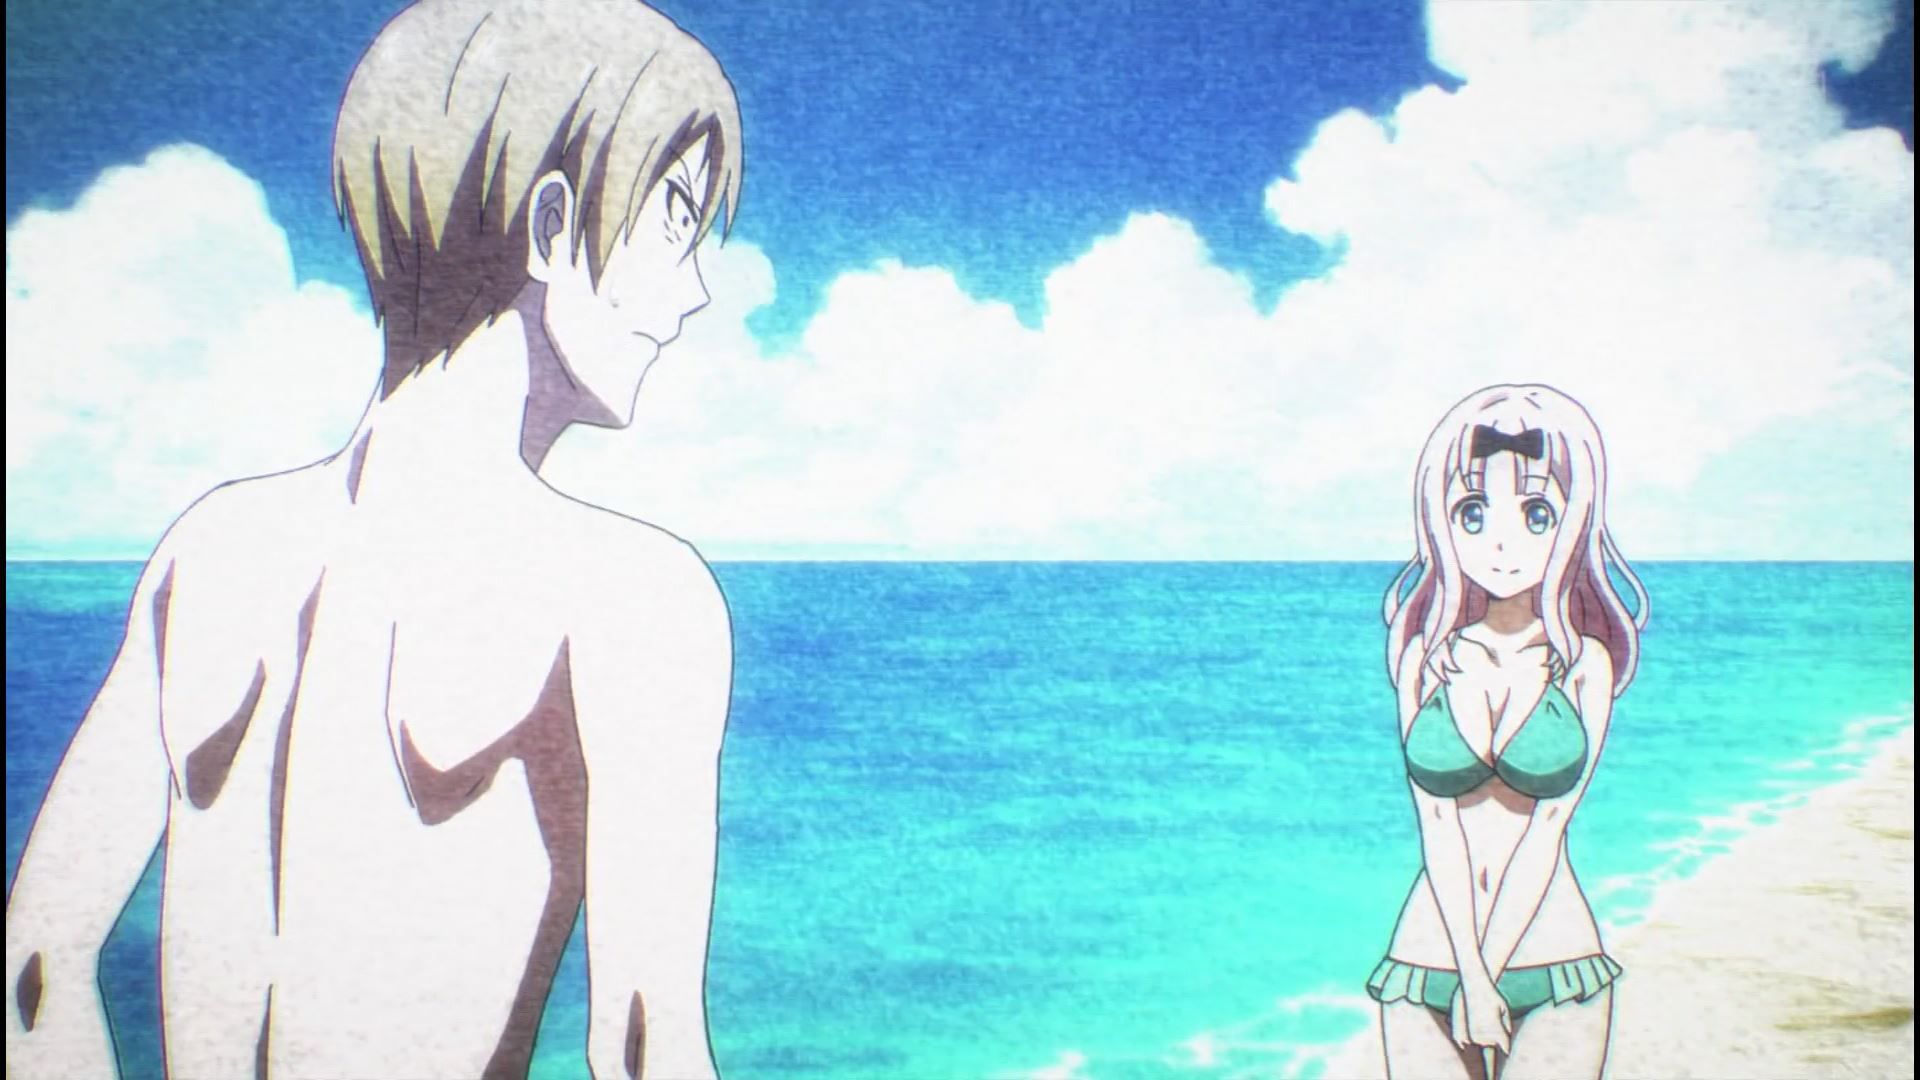 Anime [Kaguya want to be heard] 2 in the story of a girl erotic Pettanko swimsuit and breasts! 21